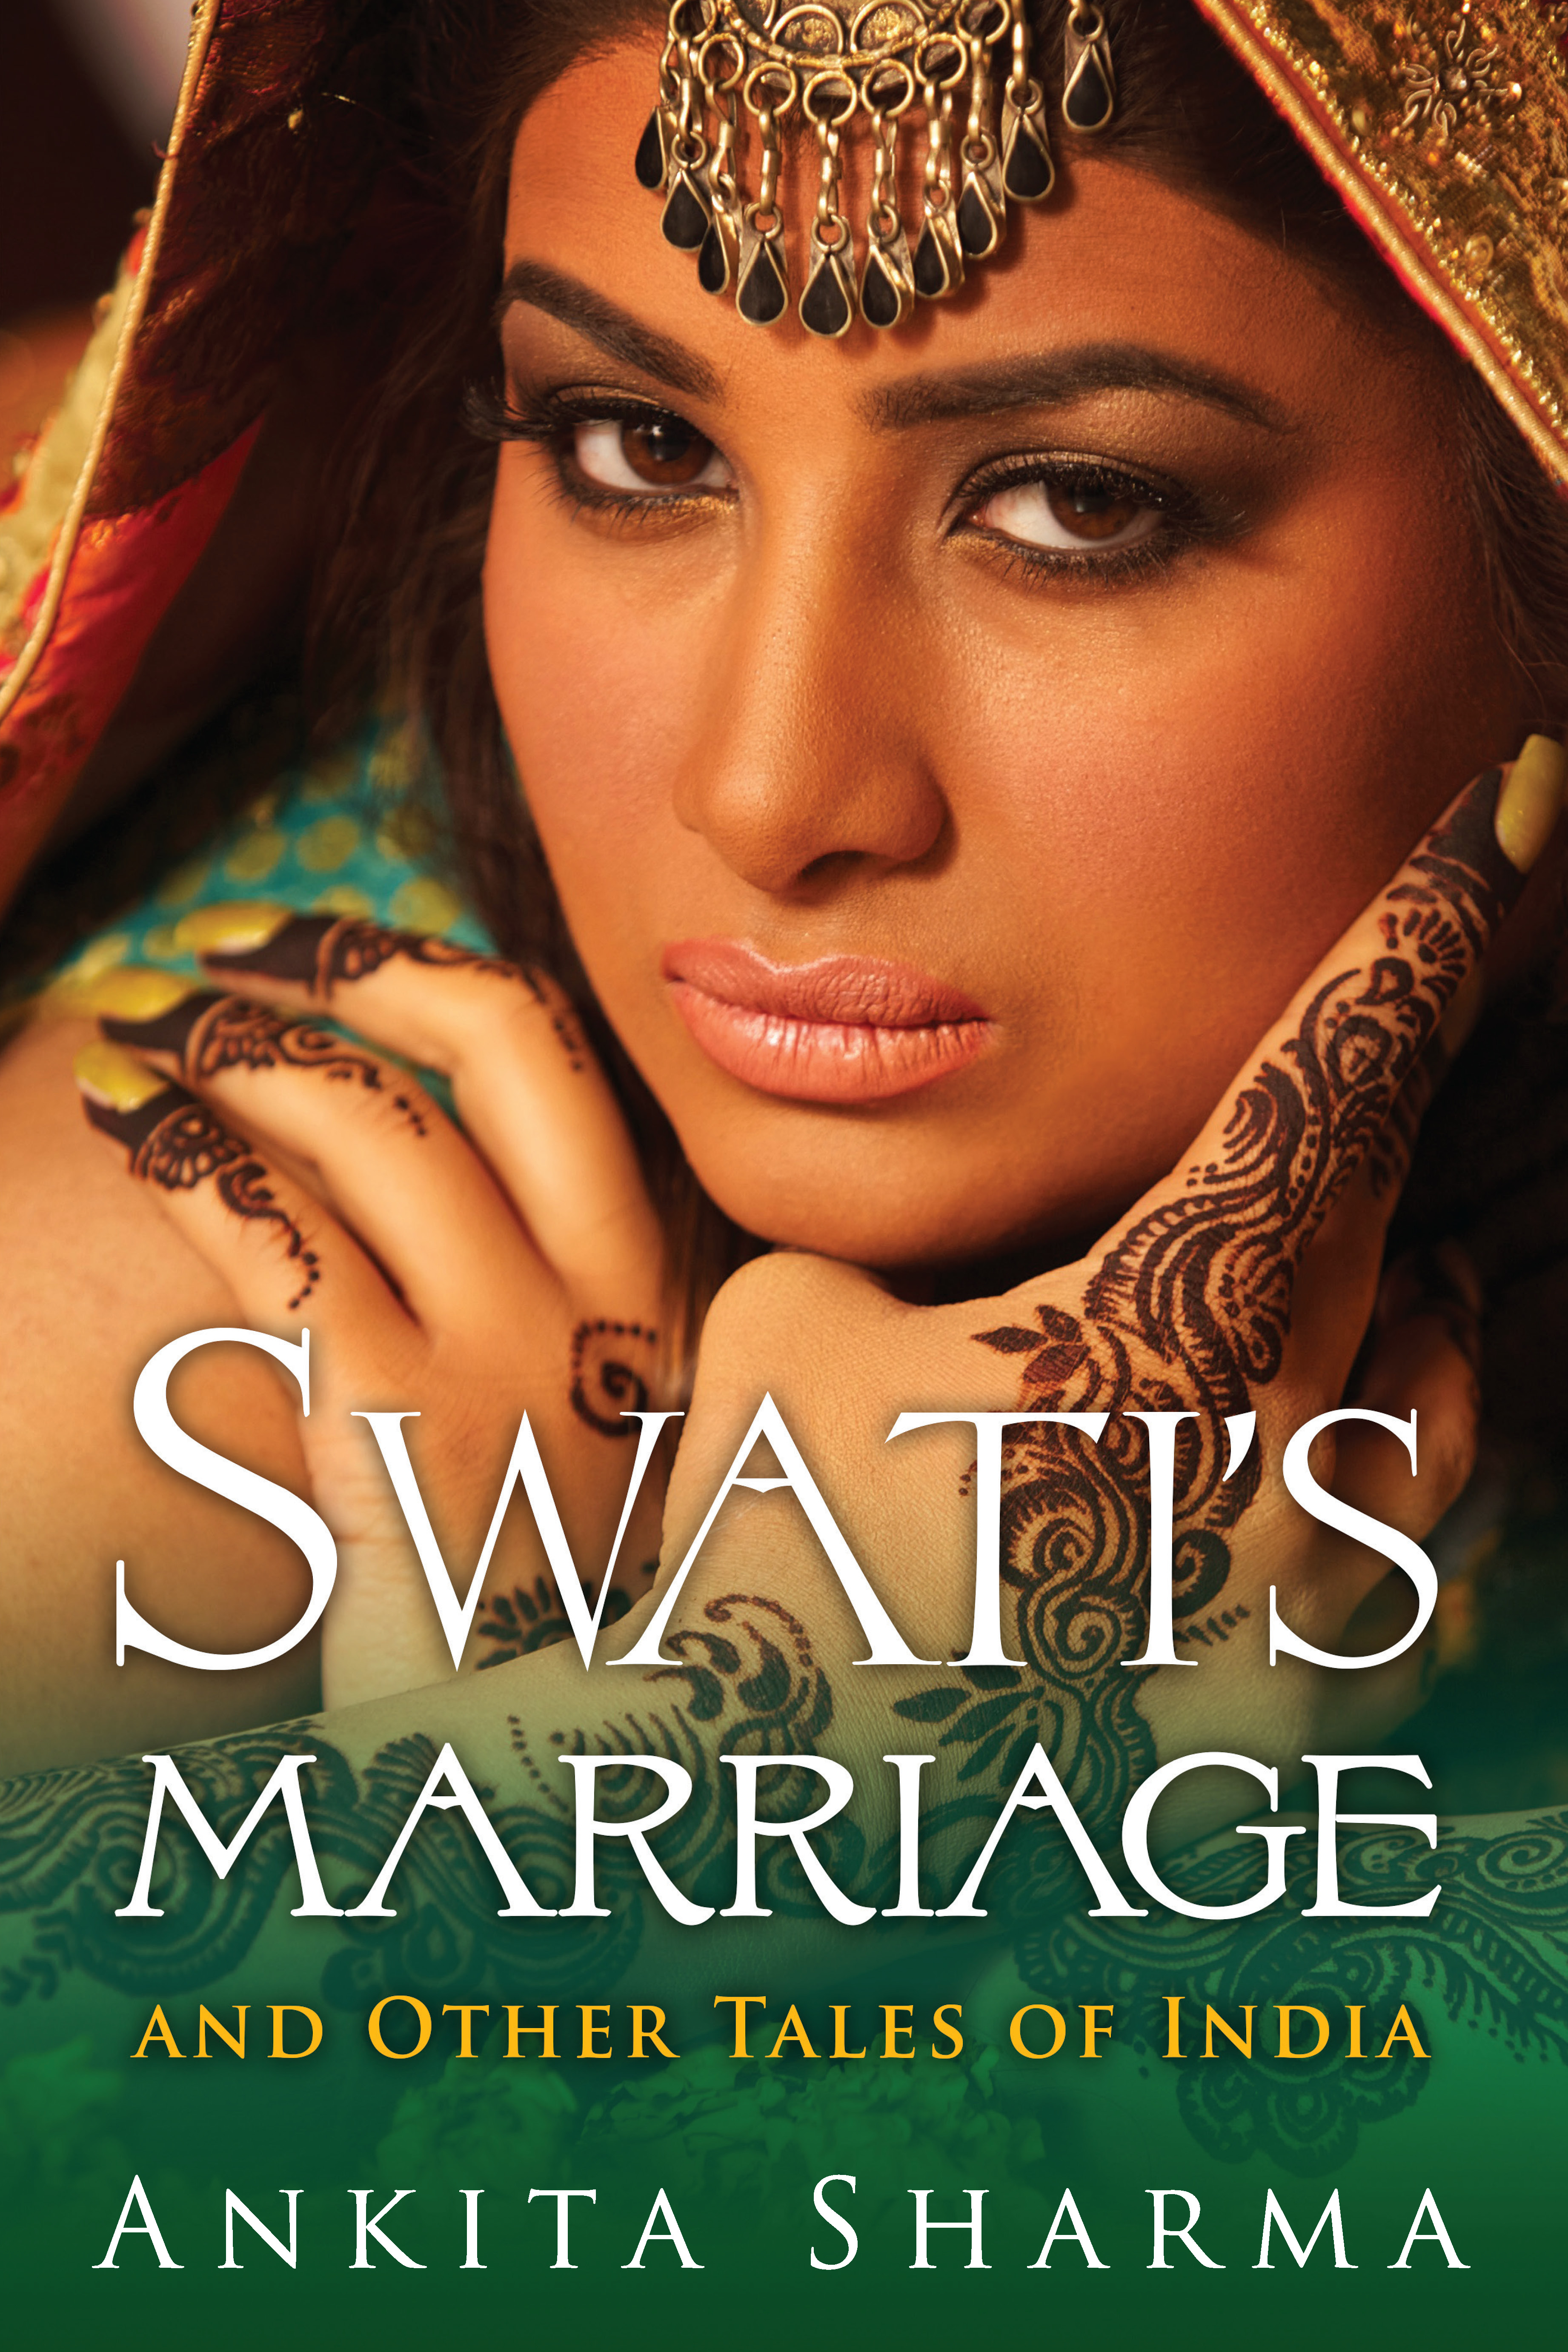 Swati's Marriage and Other Tales of India